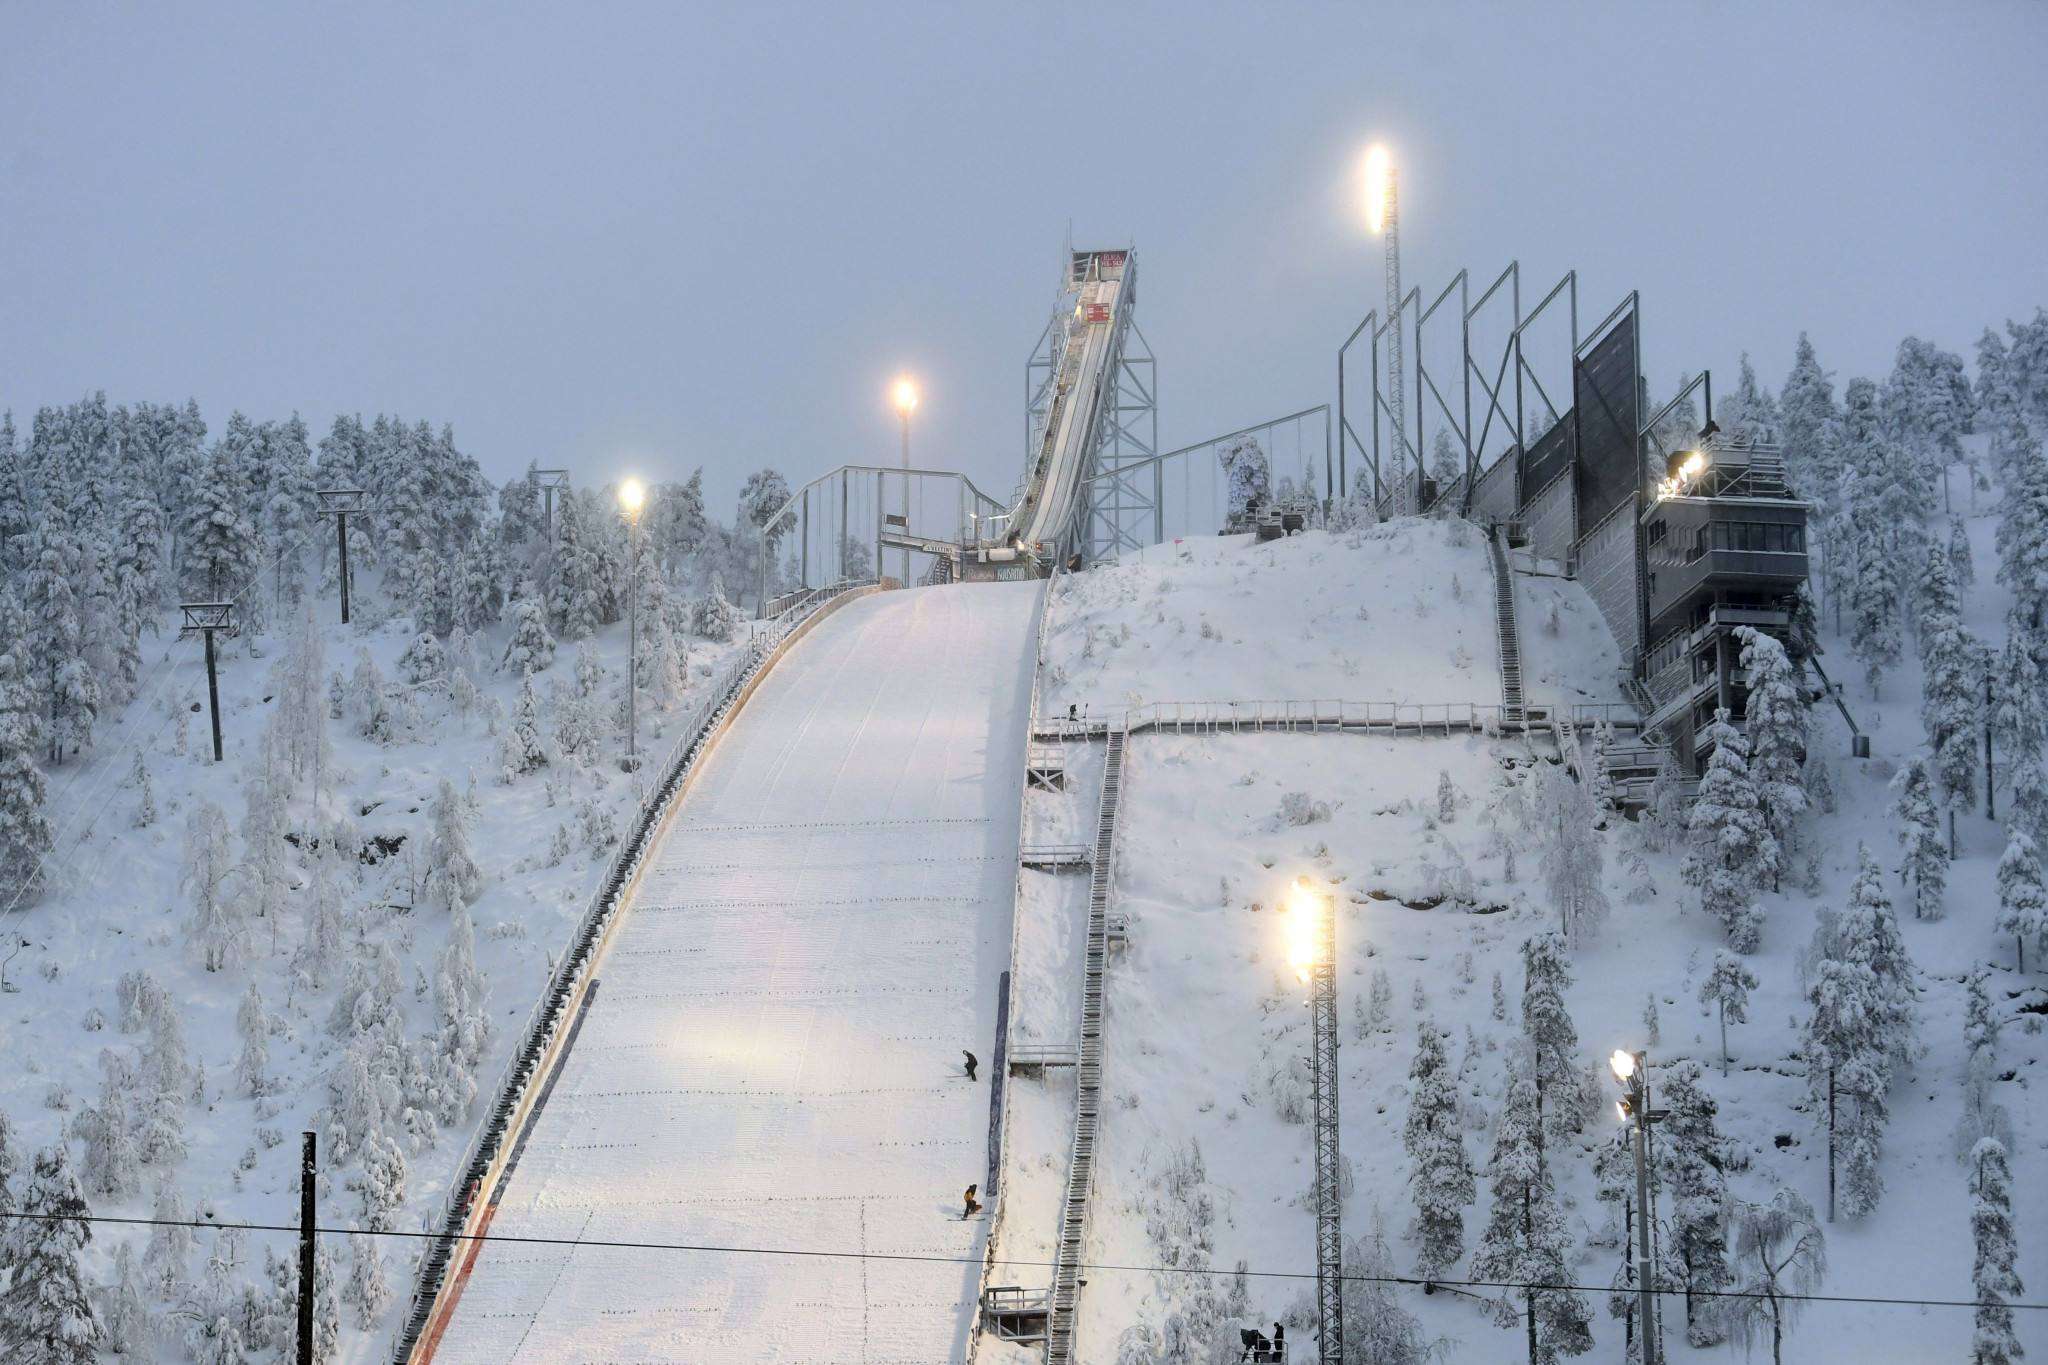 Both FIS Ski Jumping World Cup competitions in Ruka will be held under floodlights in the Finnish resort ©Getty Images